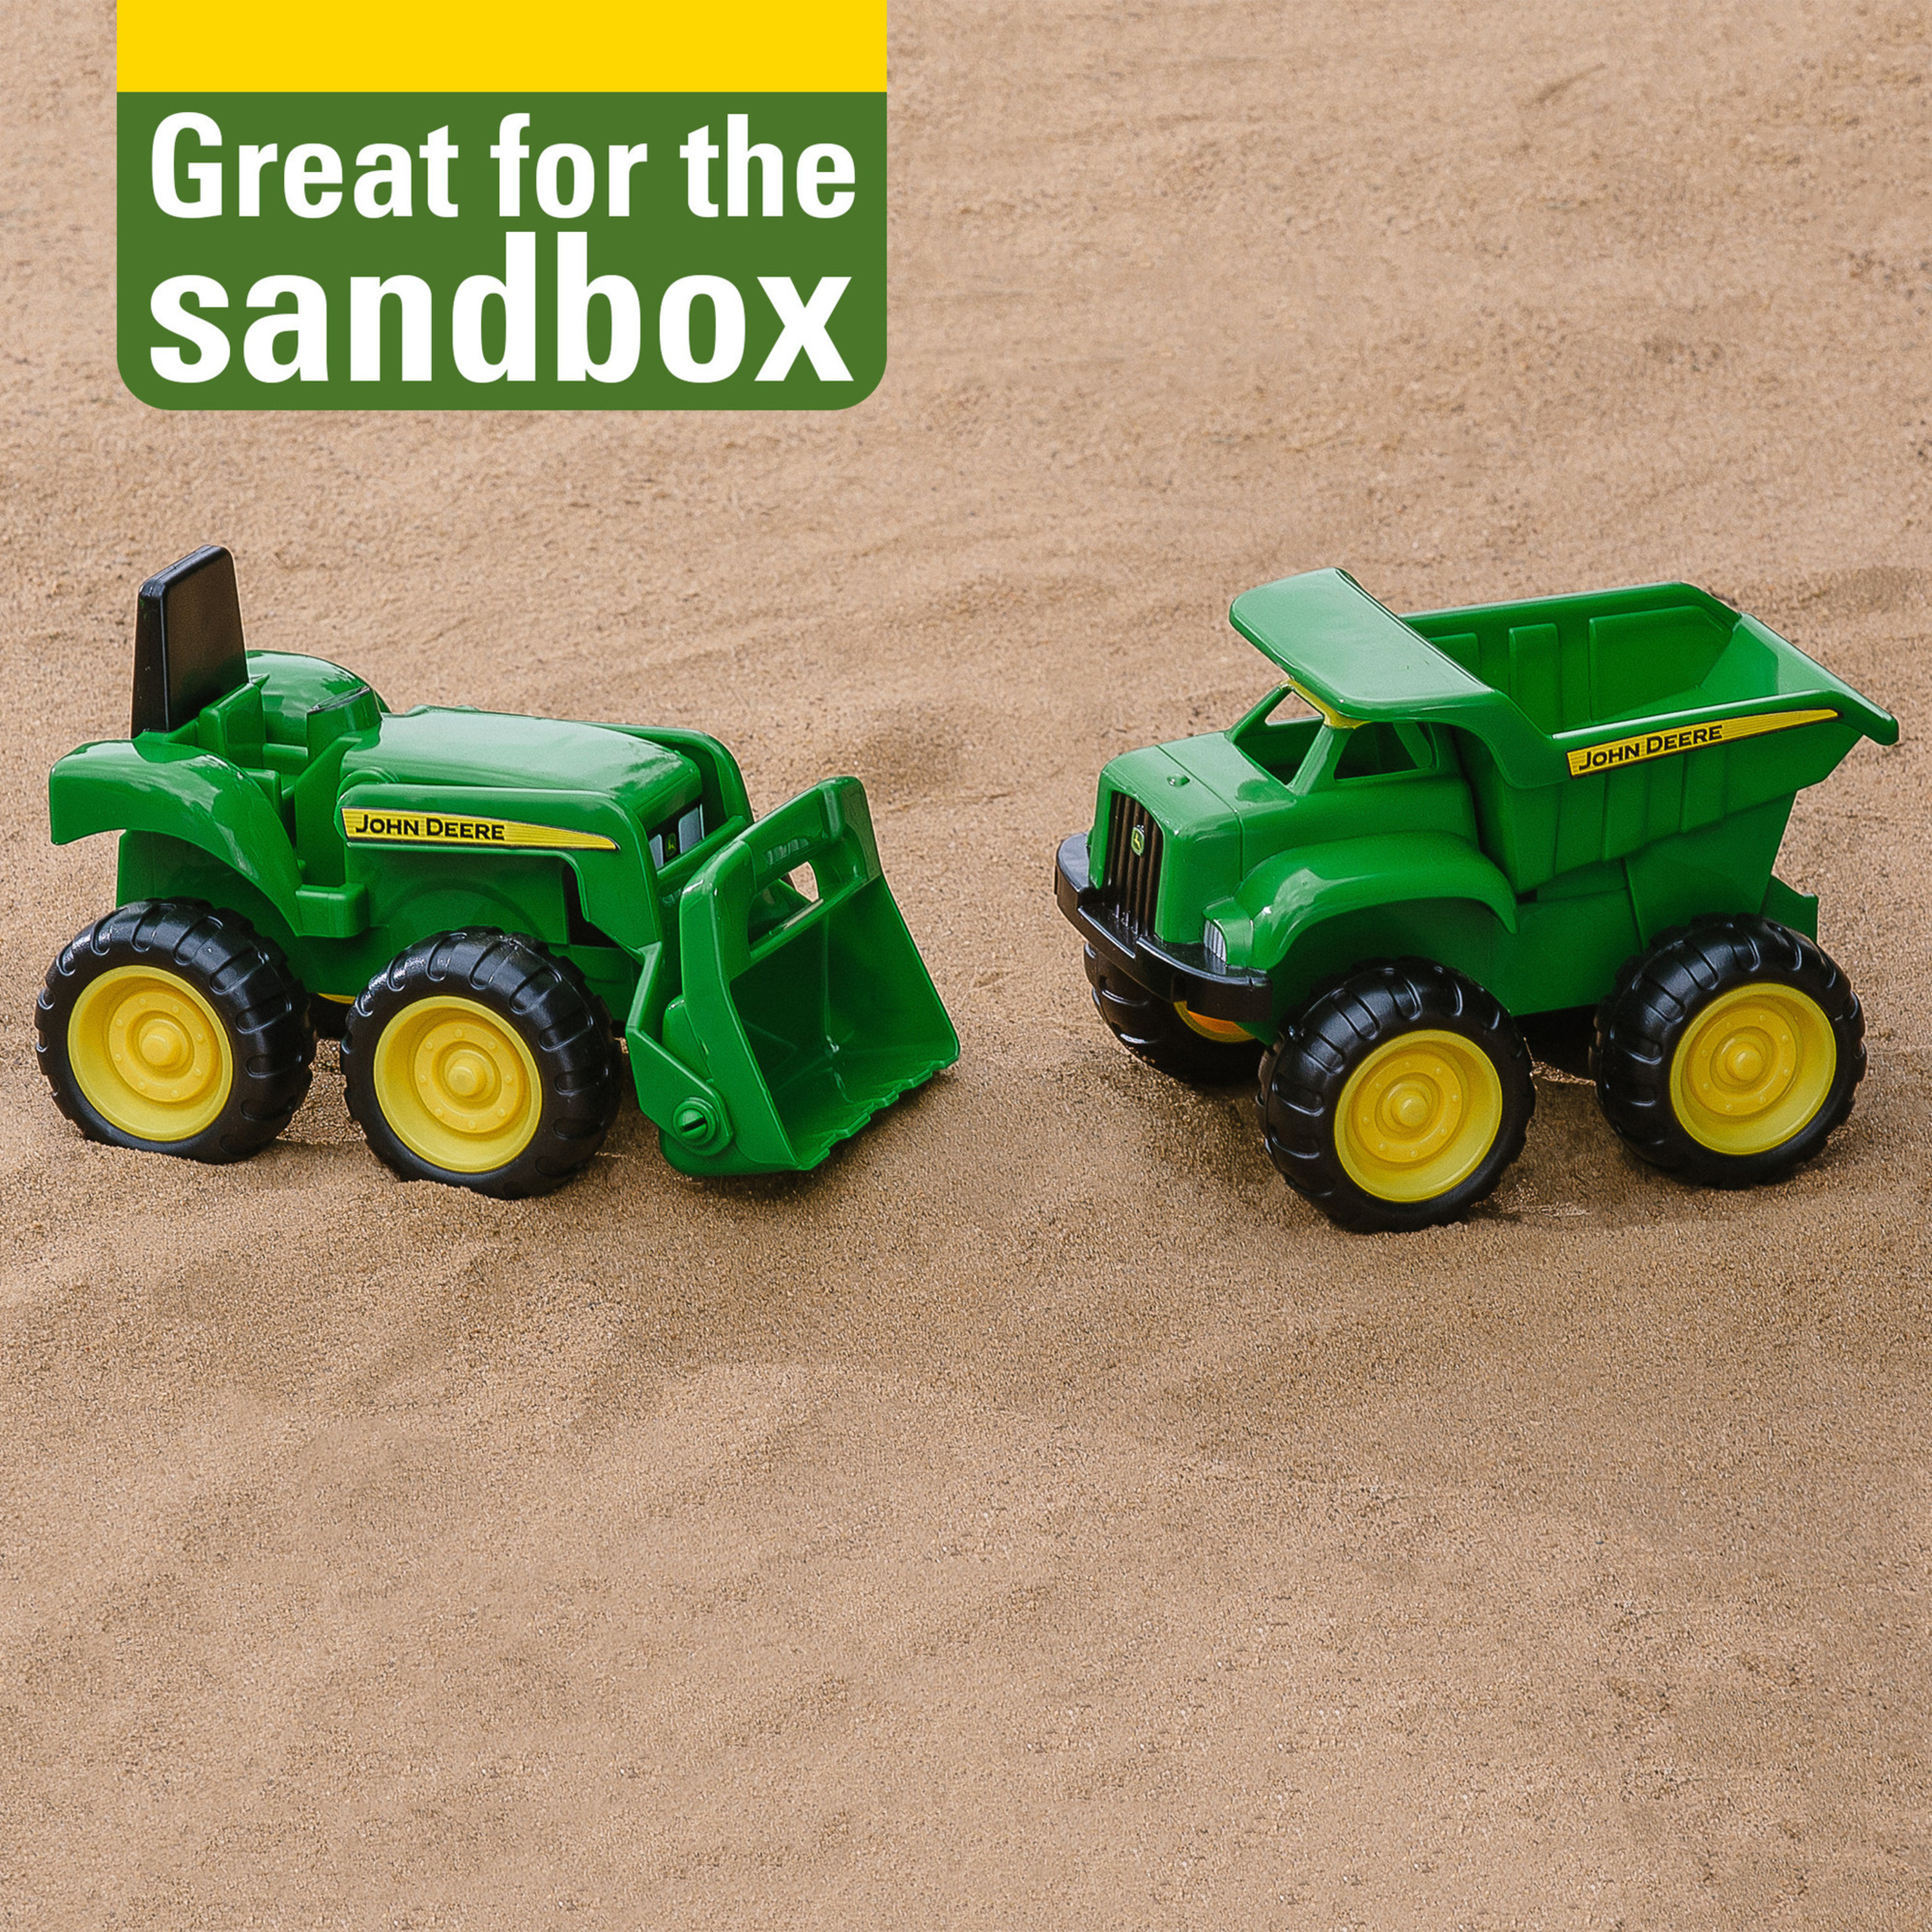 John Deere 6" Sandbox Toy Vehicle Set, Dump Truck and Tractor Toy Vehicles, 2 Pack, Green - image 3 of 13